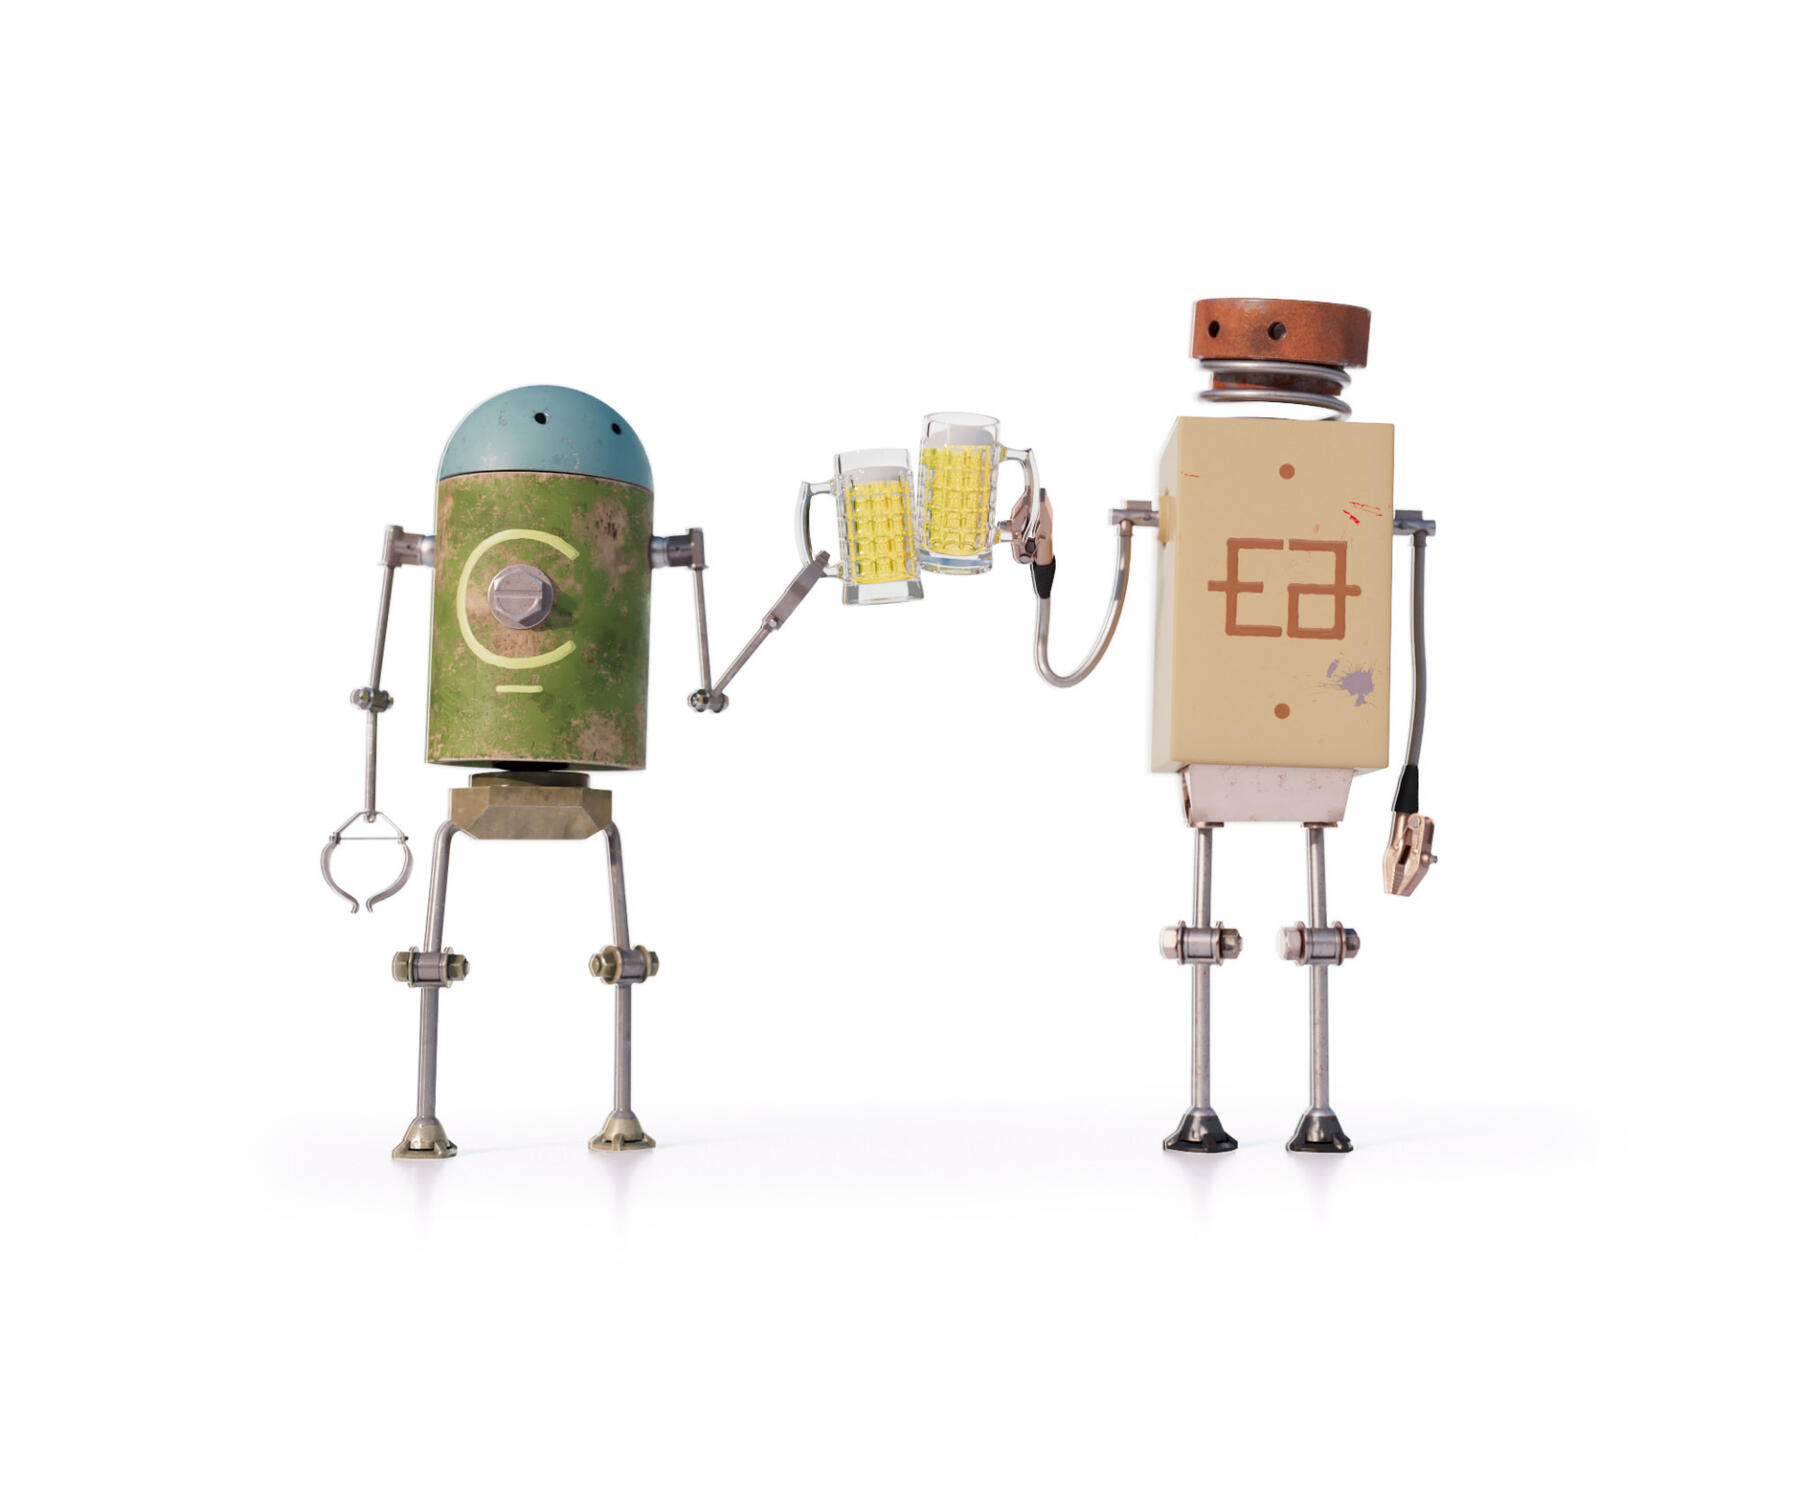 3d rendered makeshift humanoid robots clinking together glasses of beer